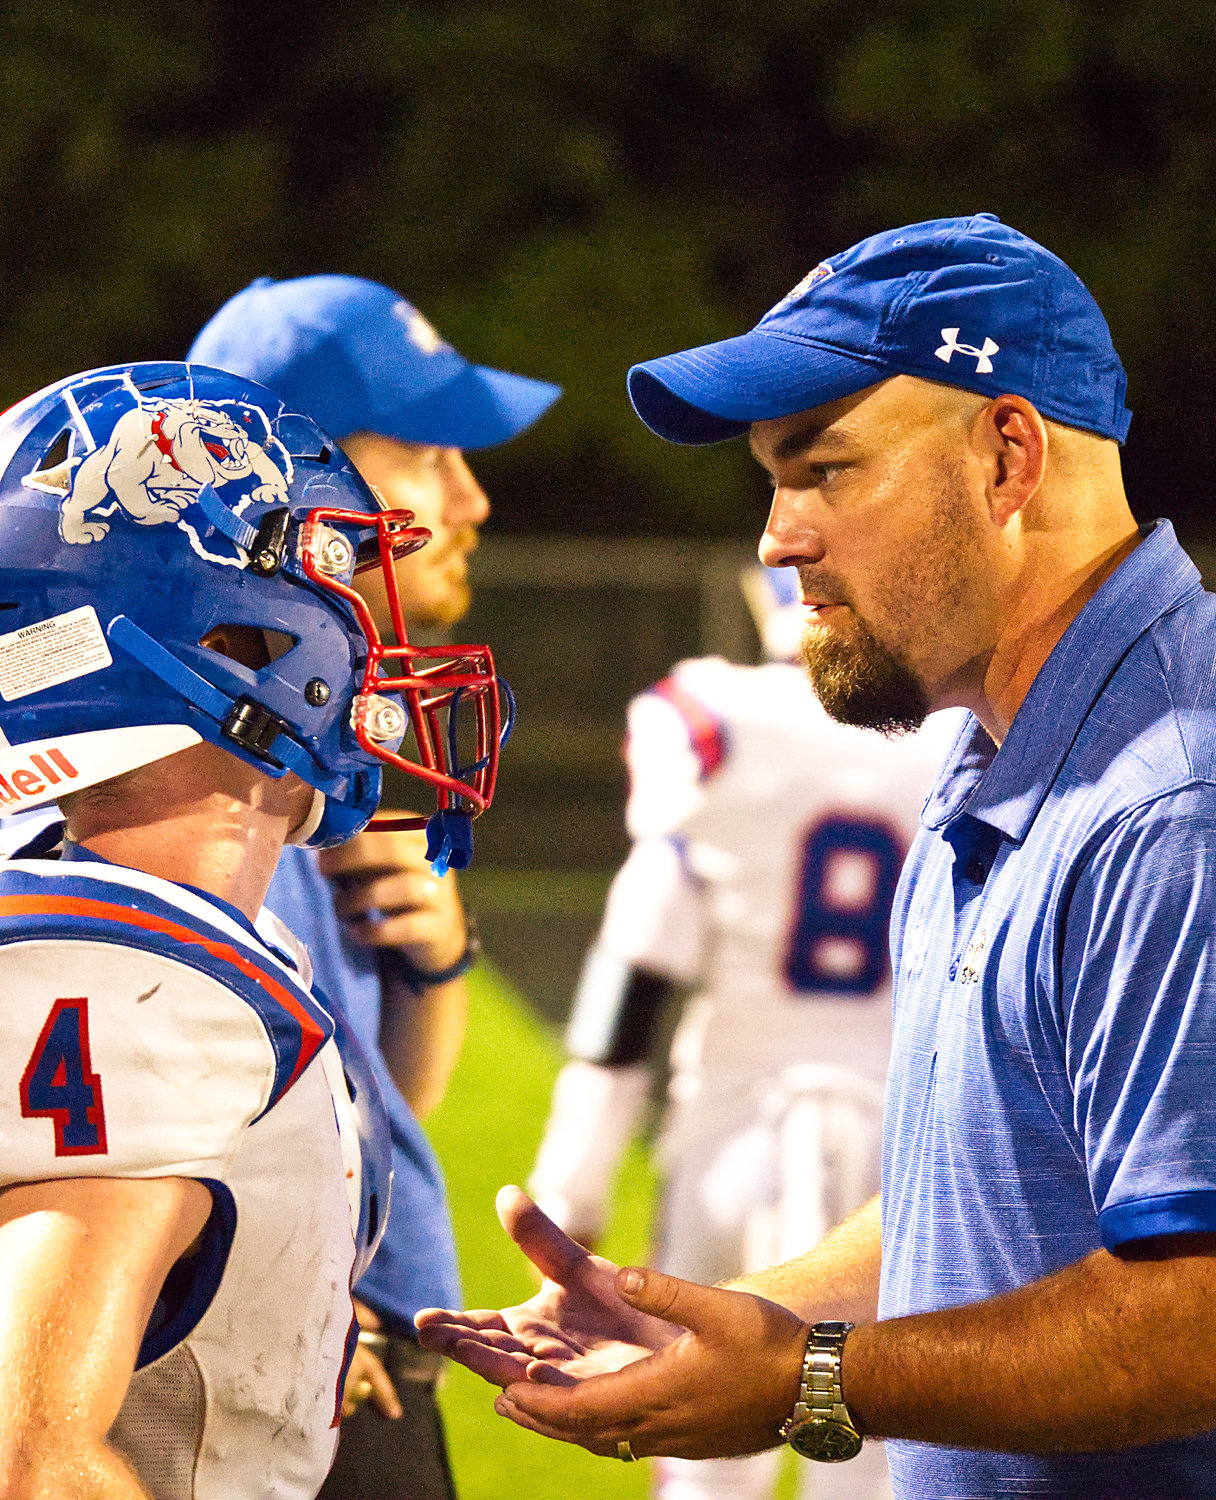 Bryan Morris gets some encouragement from Quitman coach Ryan Tierney.